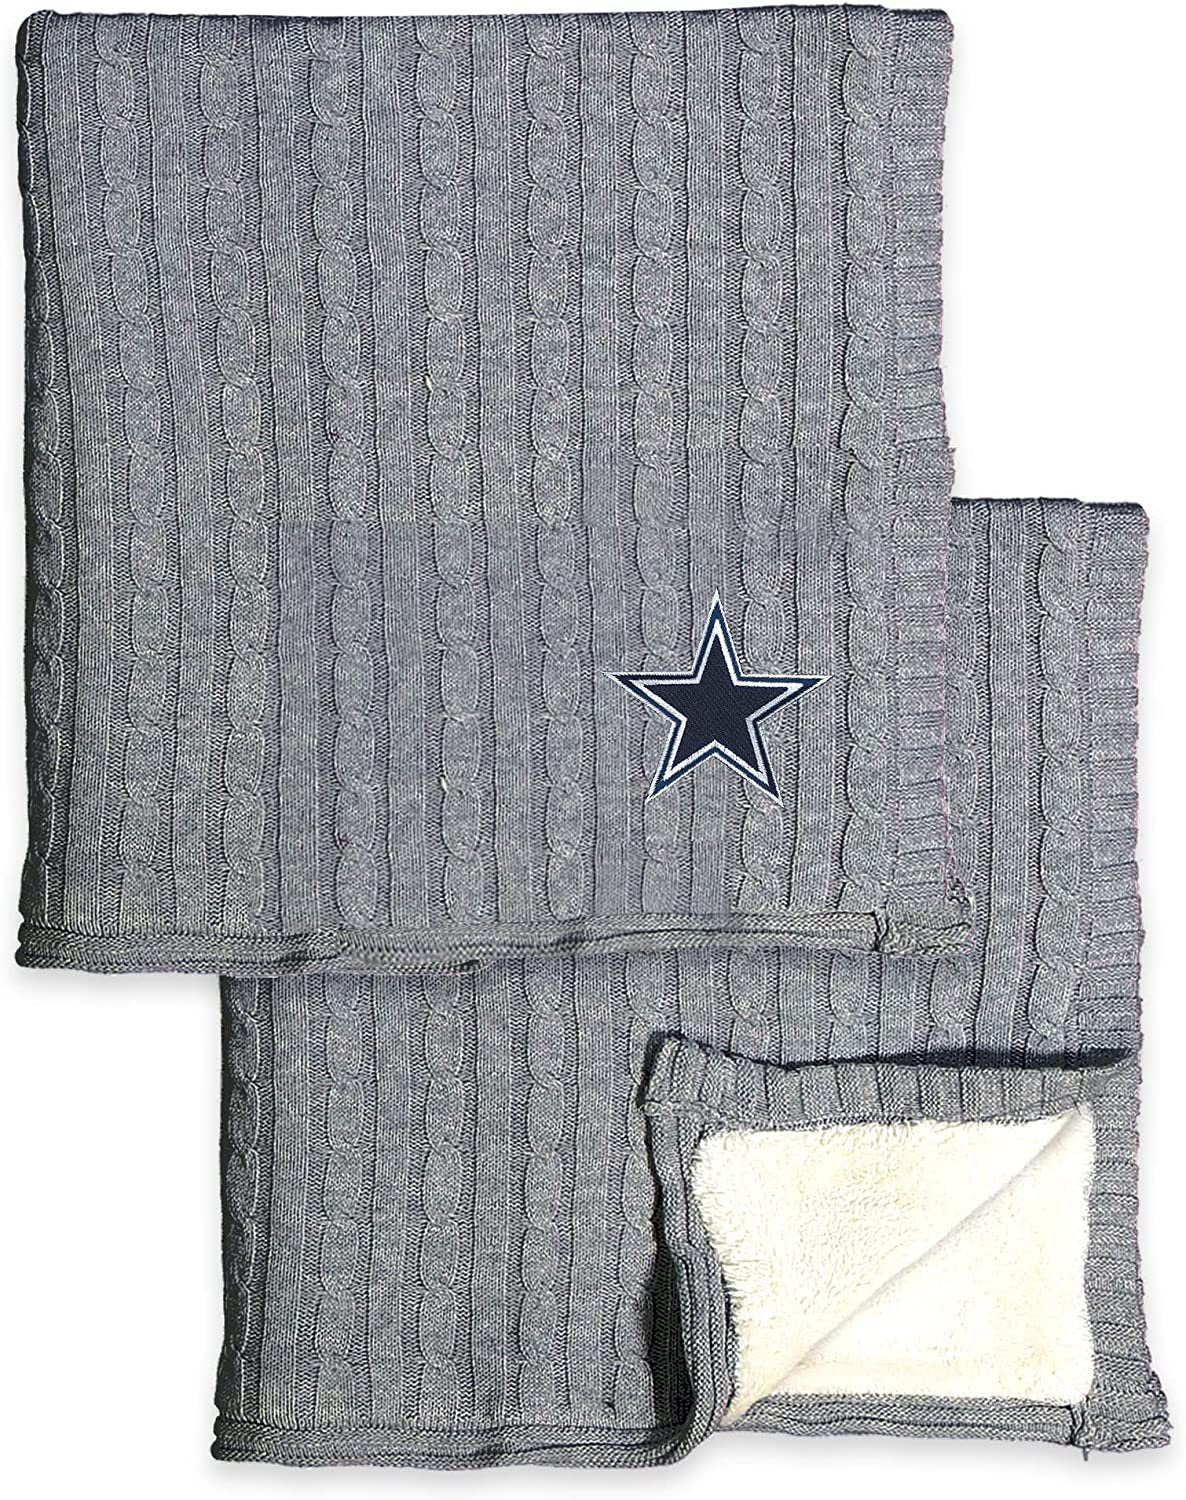 Dallas Cowboys Cable Sweater Knit Sherpa Throw Blanket 50x60 Inch Adult